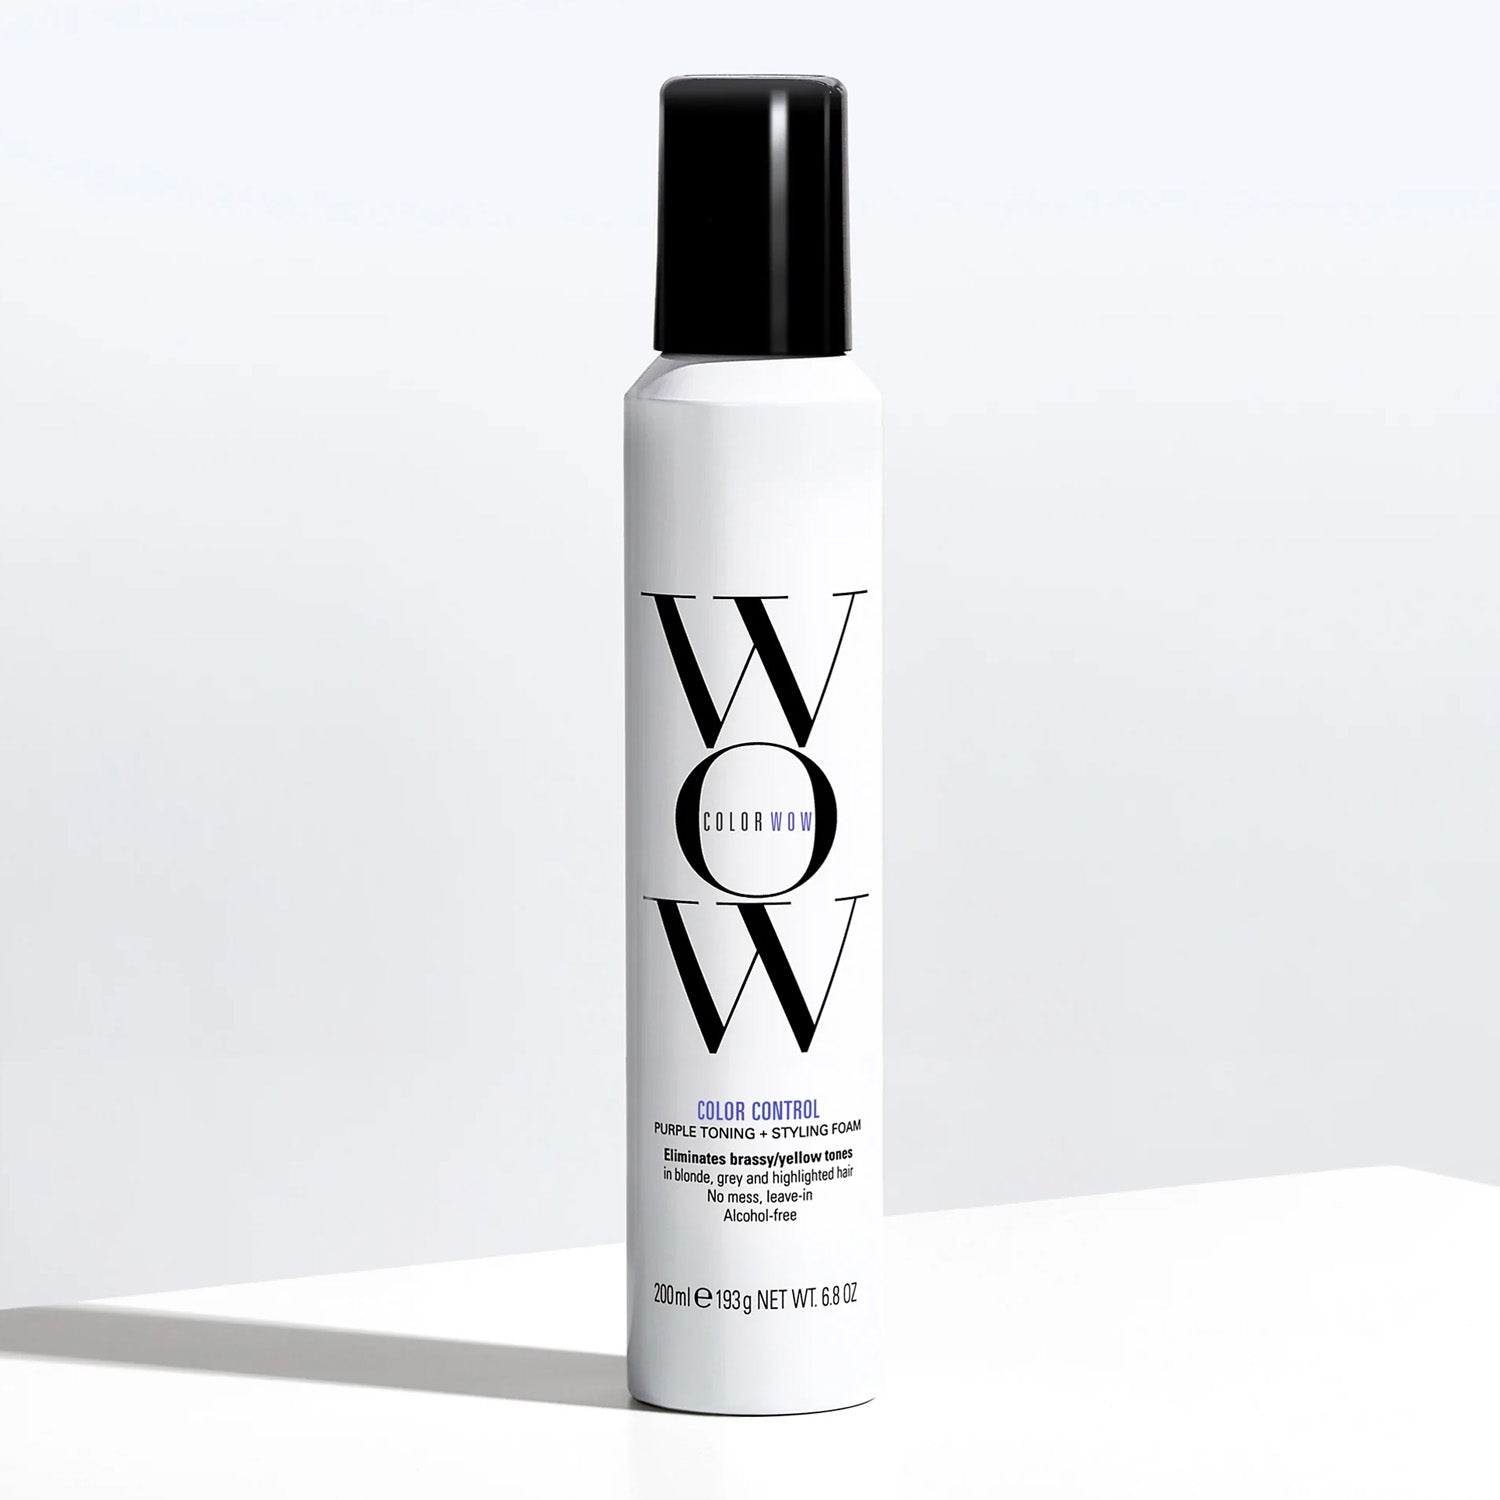 Color Wow Color Control Purple Toning + Styling Foam for Light Hair 6.8oz / 200ml